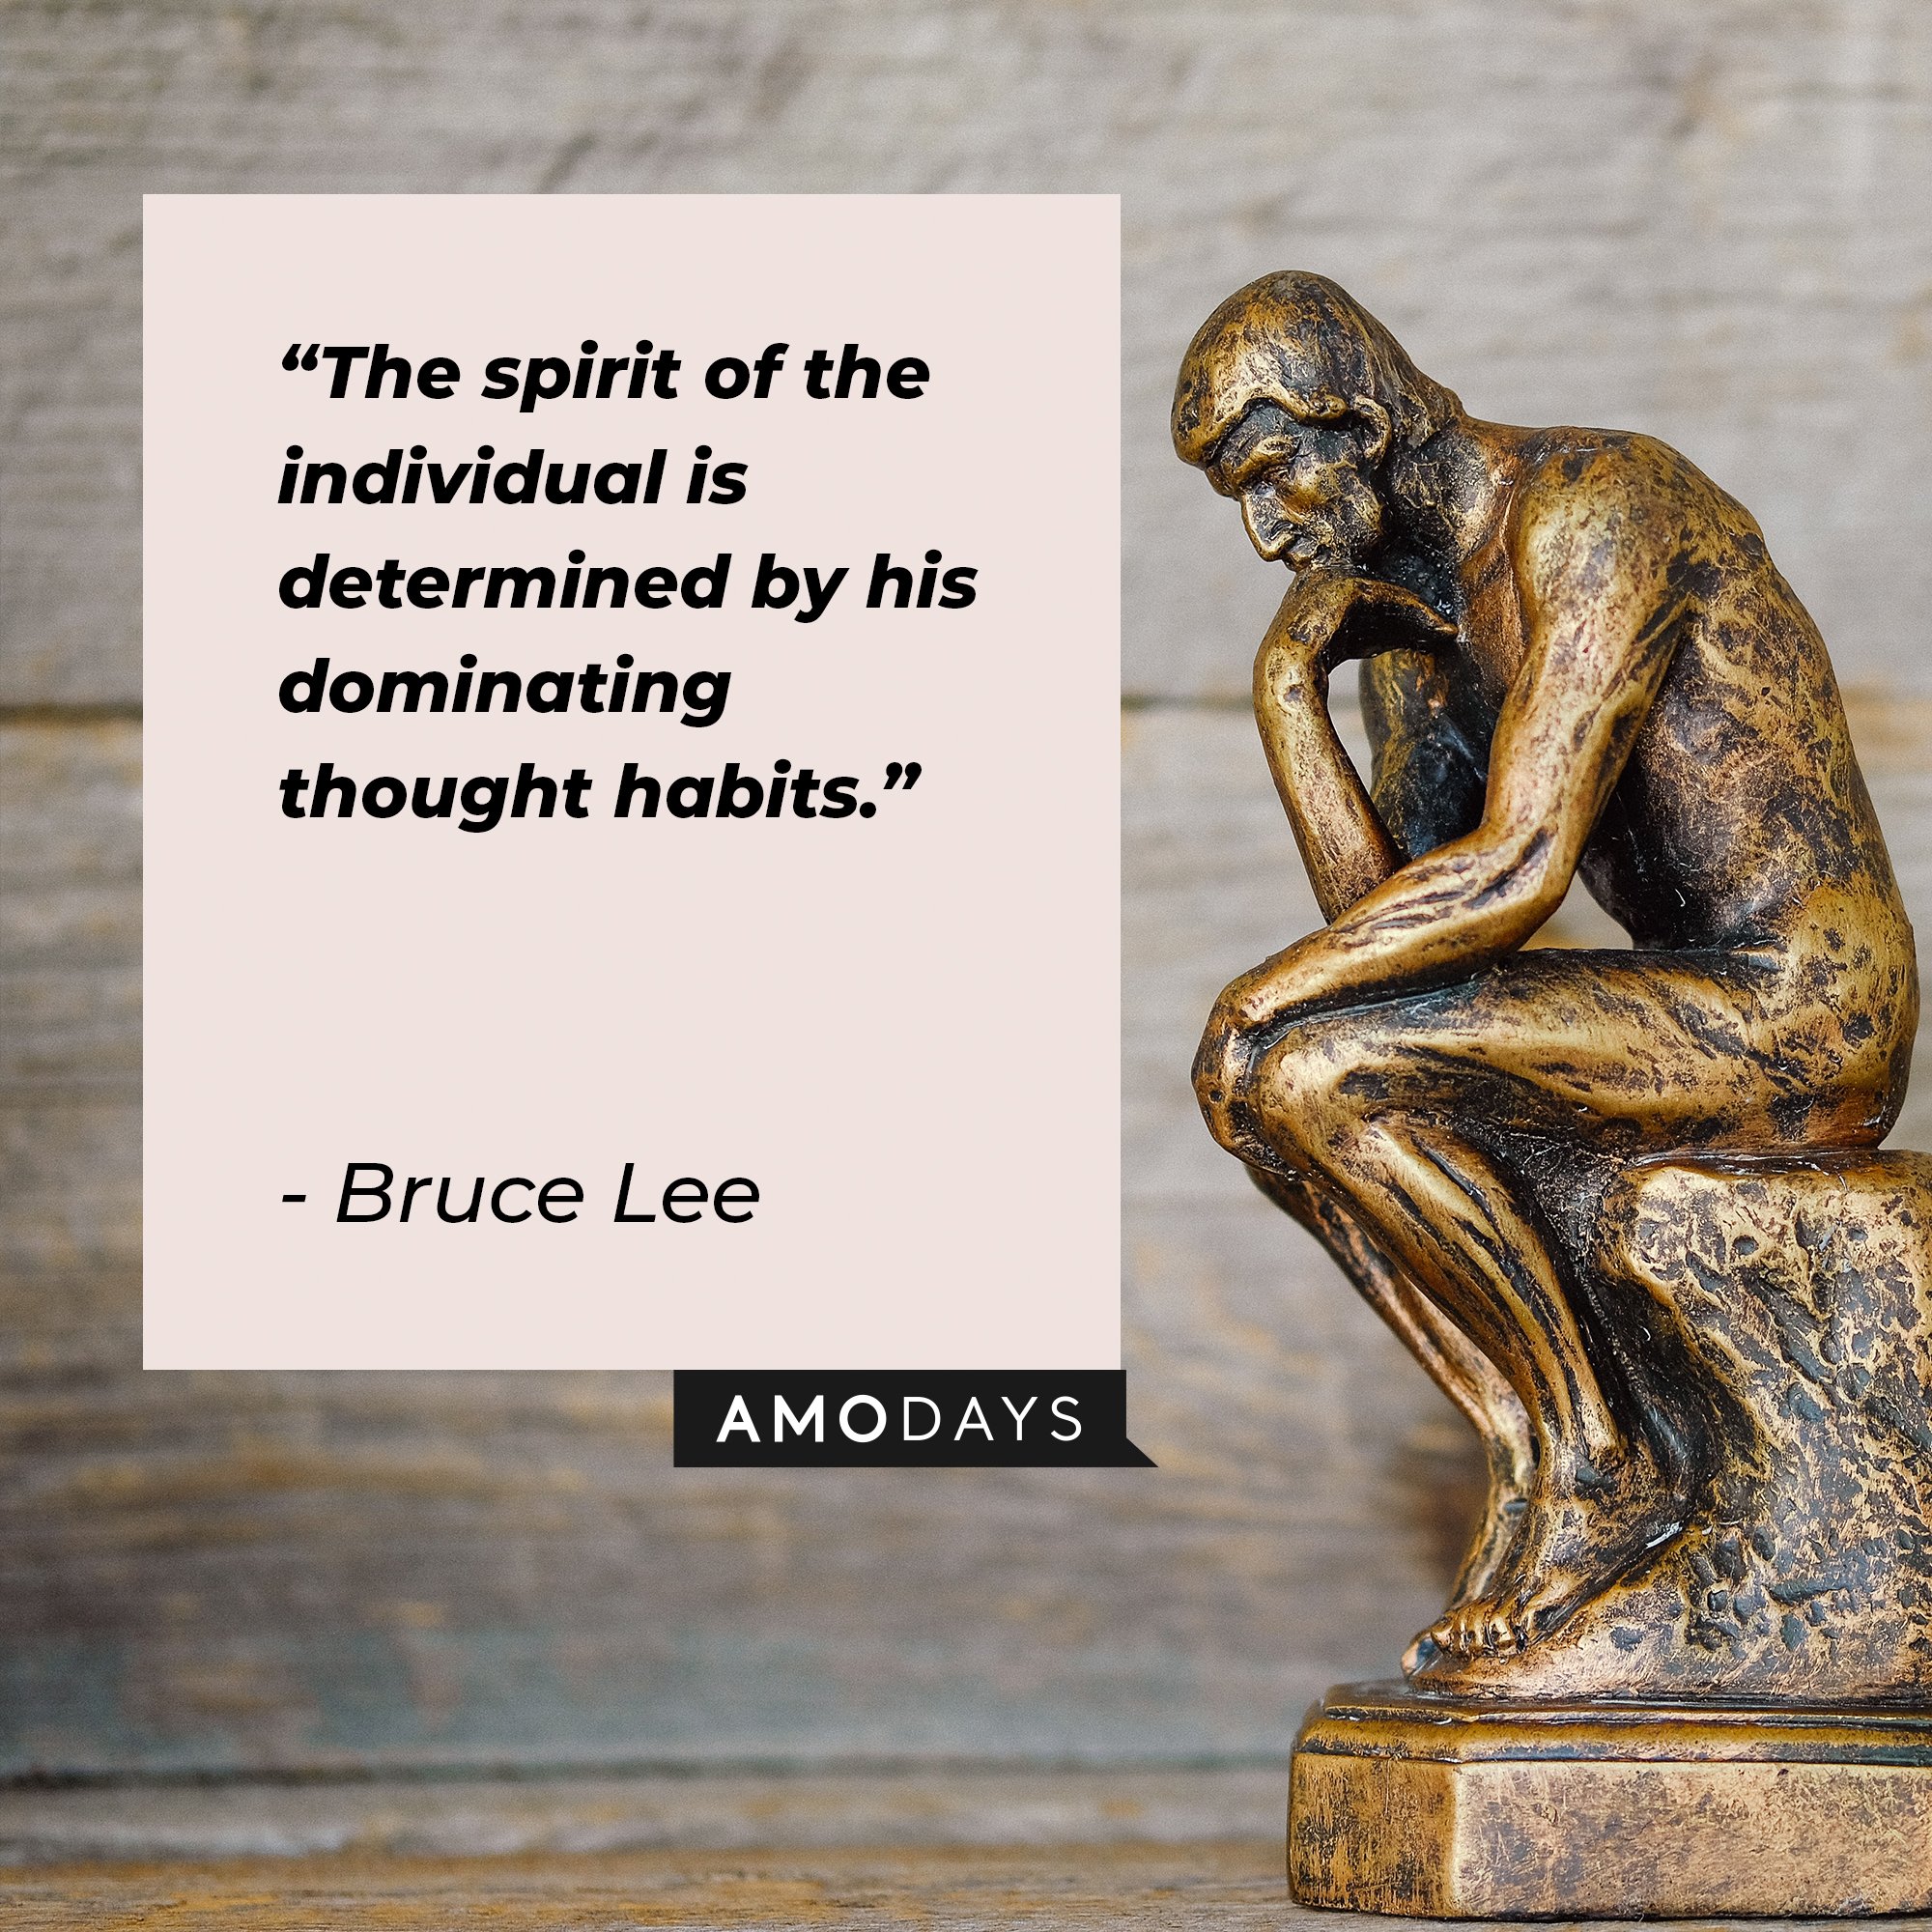 Bruce Lee’s quote: "The spirit of the individual is determined by his dominating thought habits." | Image: AmoDays 